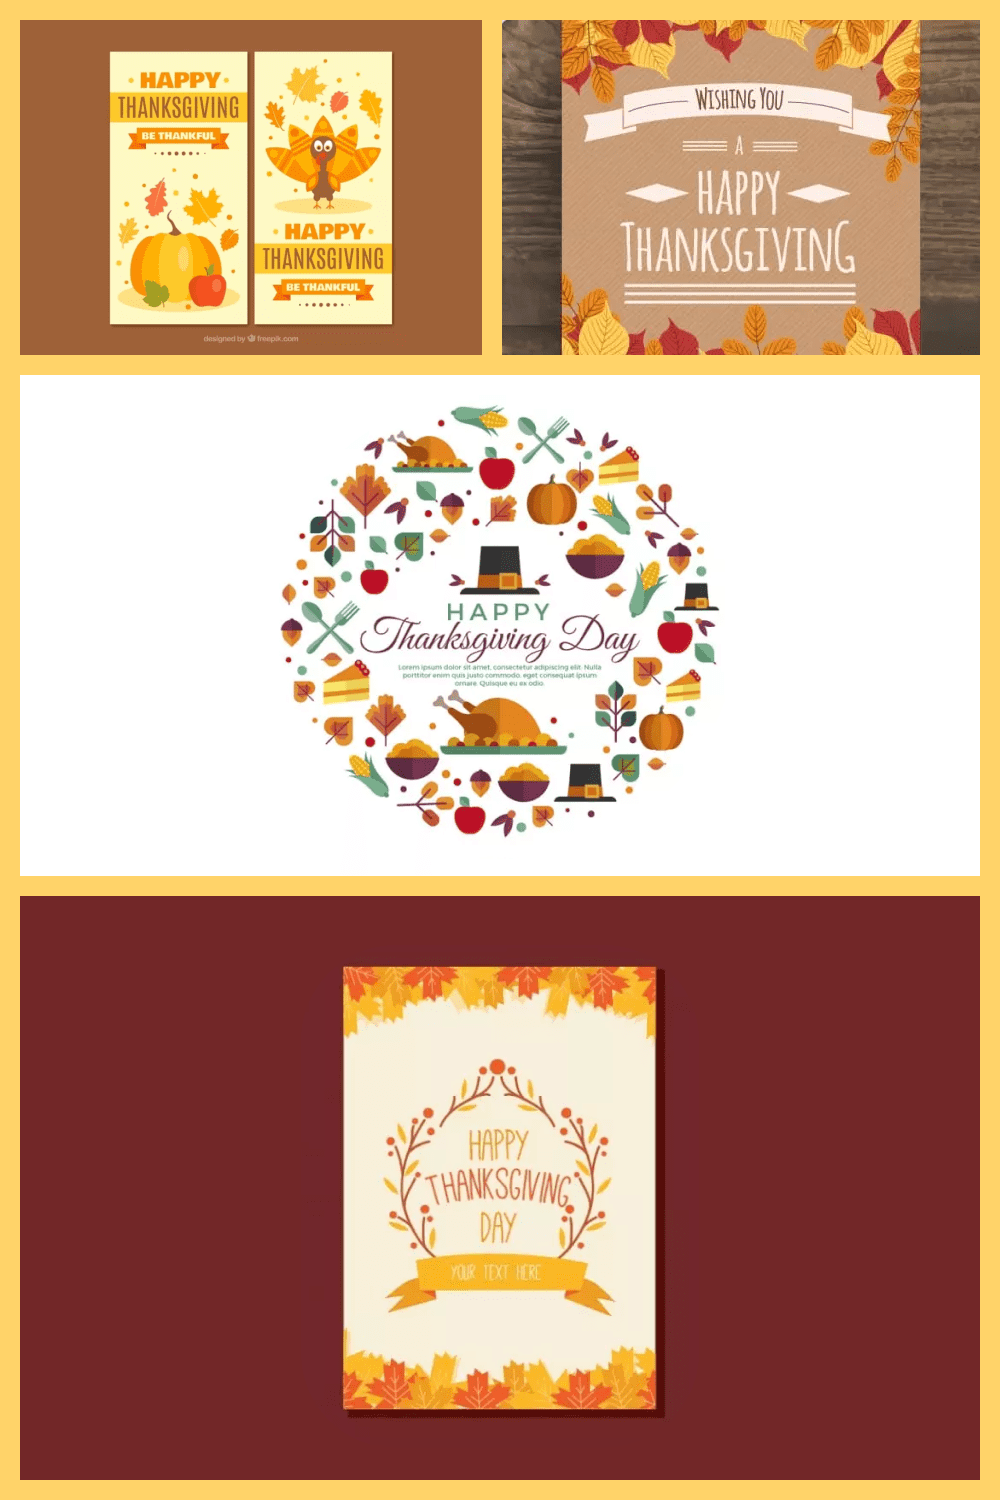 Collage of flyer screenshots on Thanksgiving theme in yellow color.